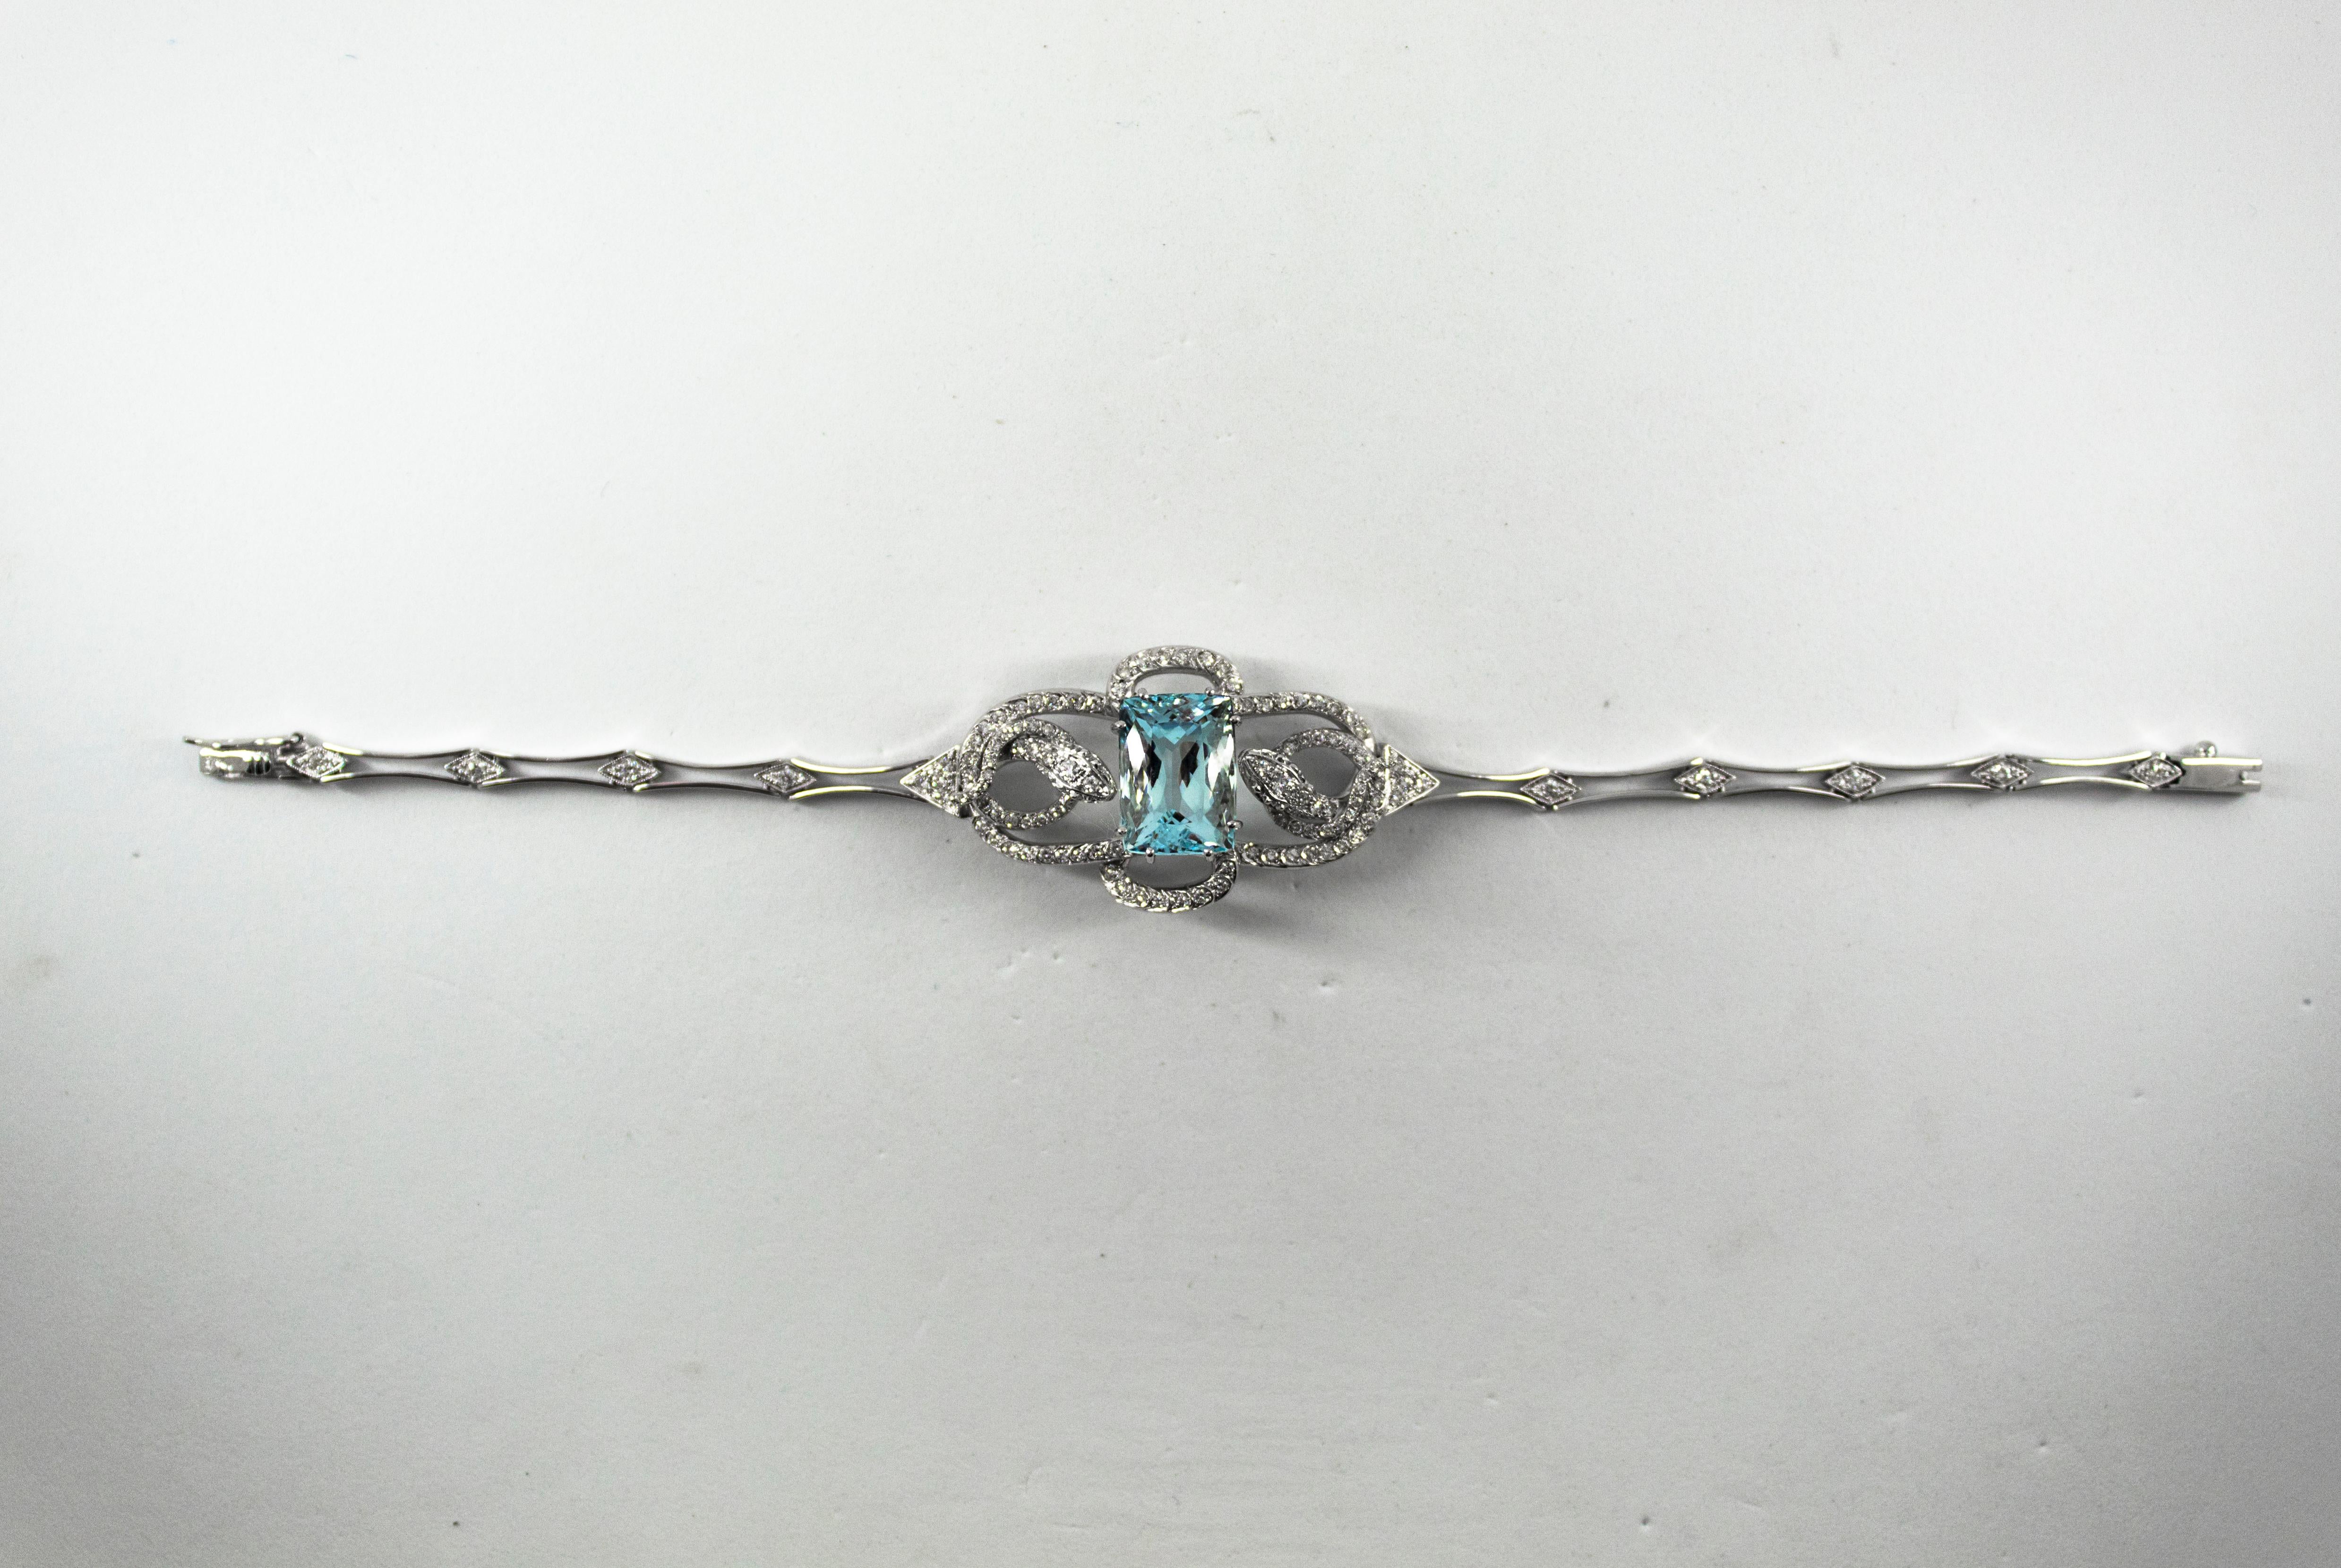 This Bracelet is made of 18K White Gold.
This Bracelet has 1.25 Carats of White Modern Round Cut Diamonds.
This Bracelet has an 8.60 Carats Natural Aquamarine.
This Bracelet is inspired by Art Nouveau.
We're a workshop so every piece is handmade,